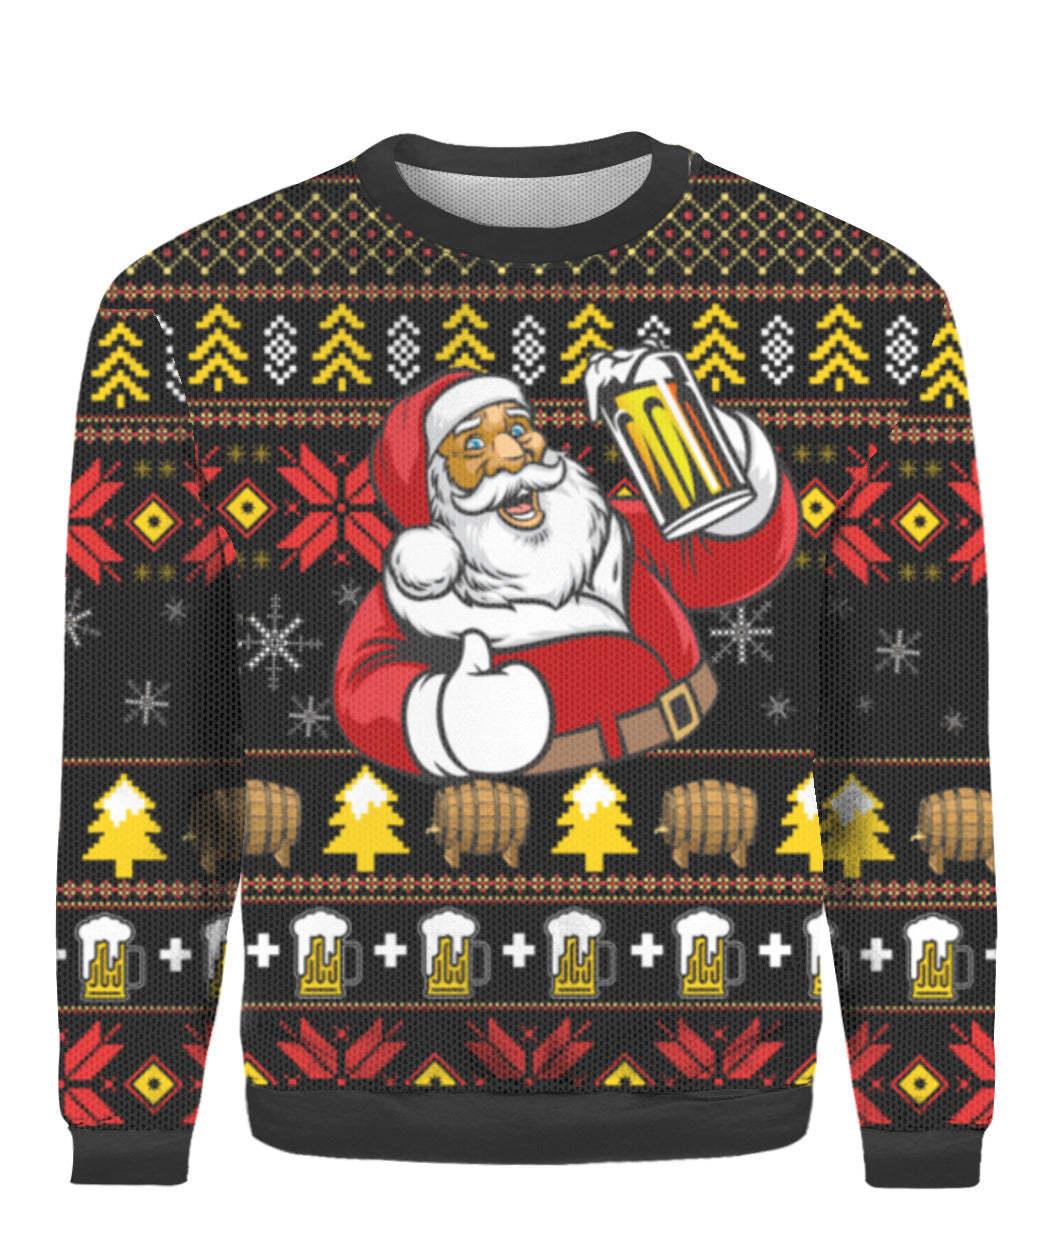 It's The Most Wonderful Time For A Beer With Santa Claus Ugly Sweater - Santa Joker